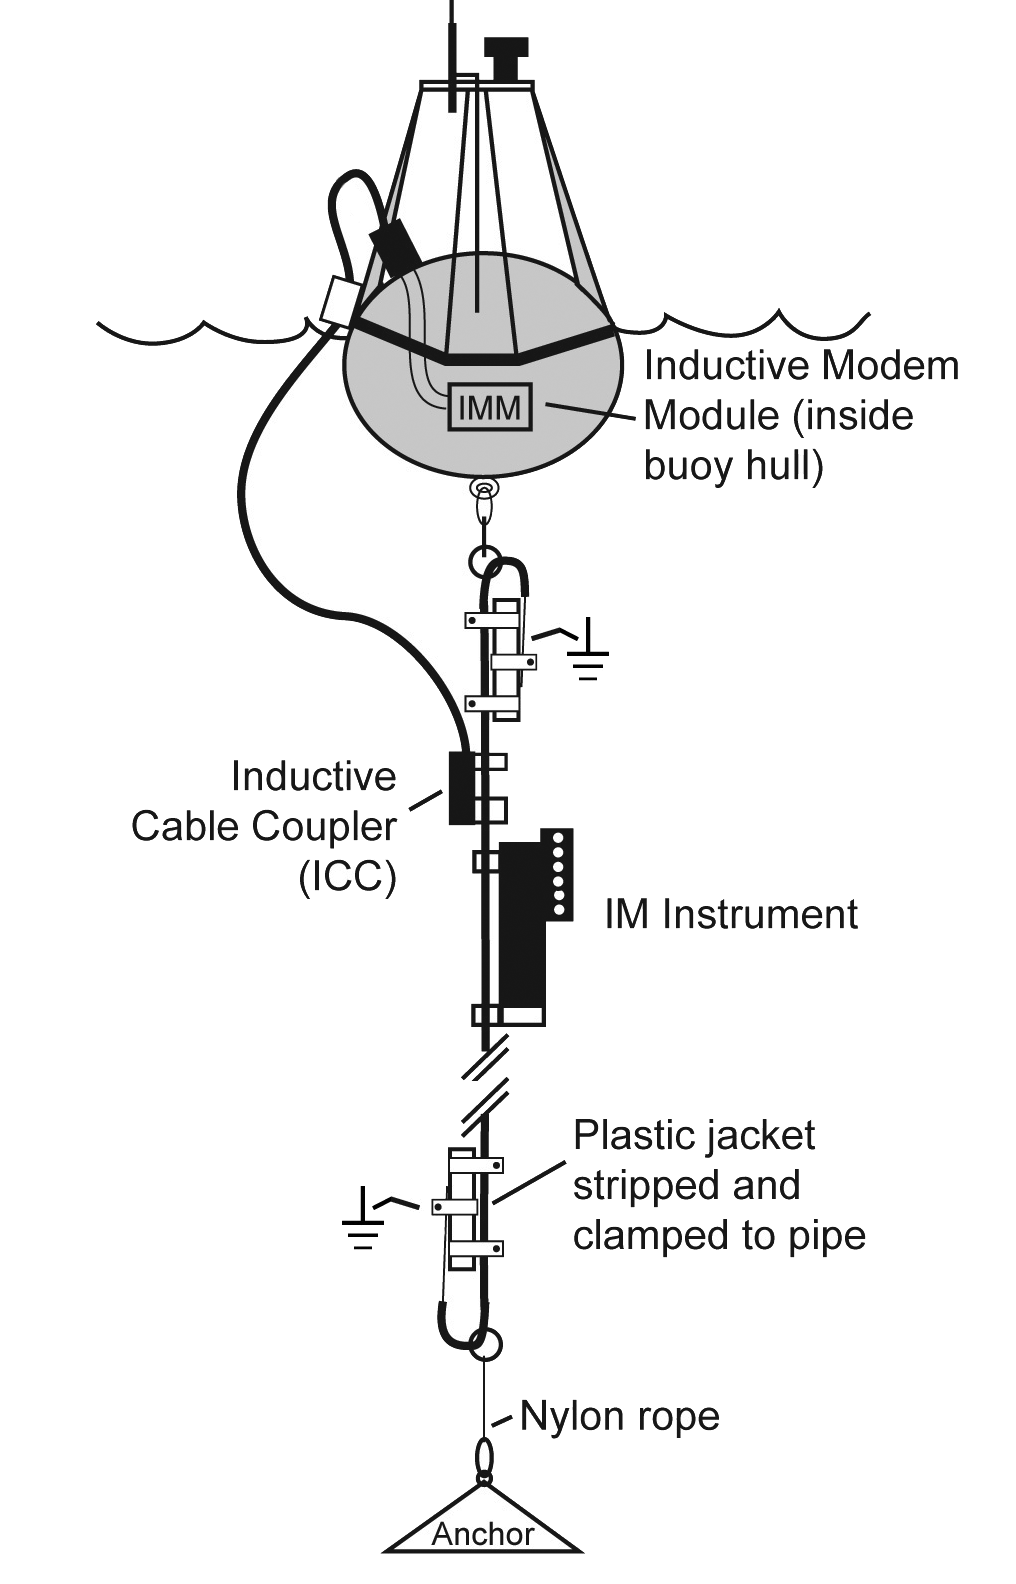 Diagram of a freshwater inductive modem mooring